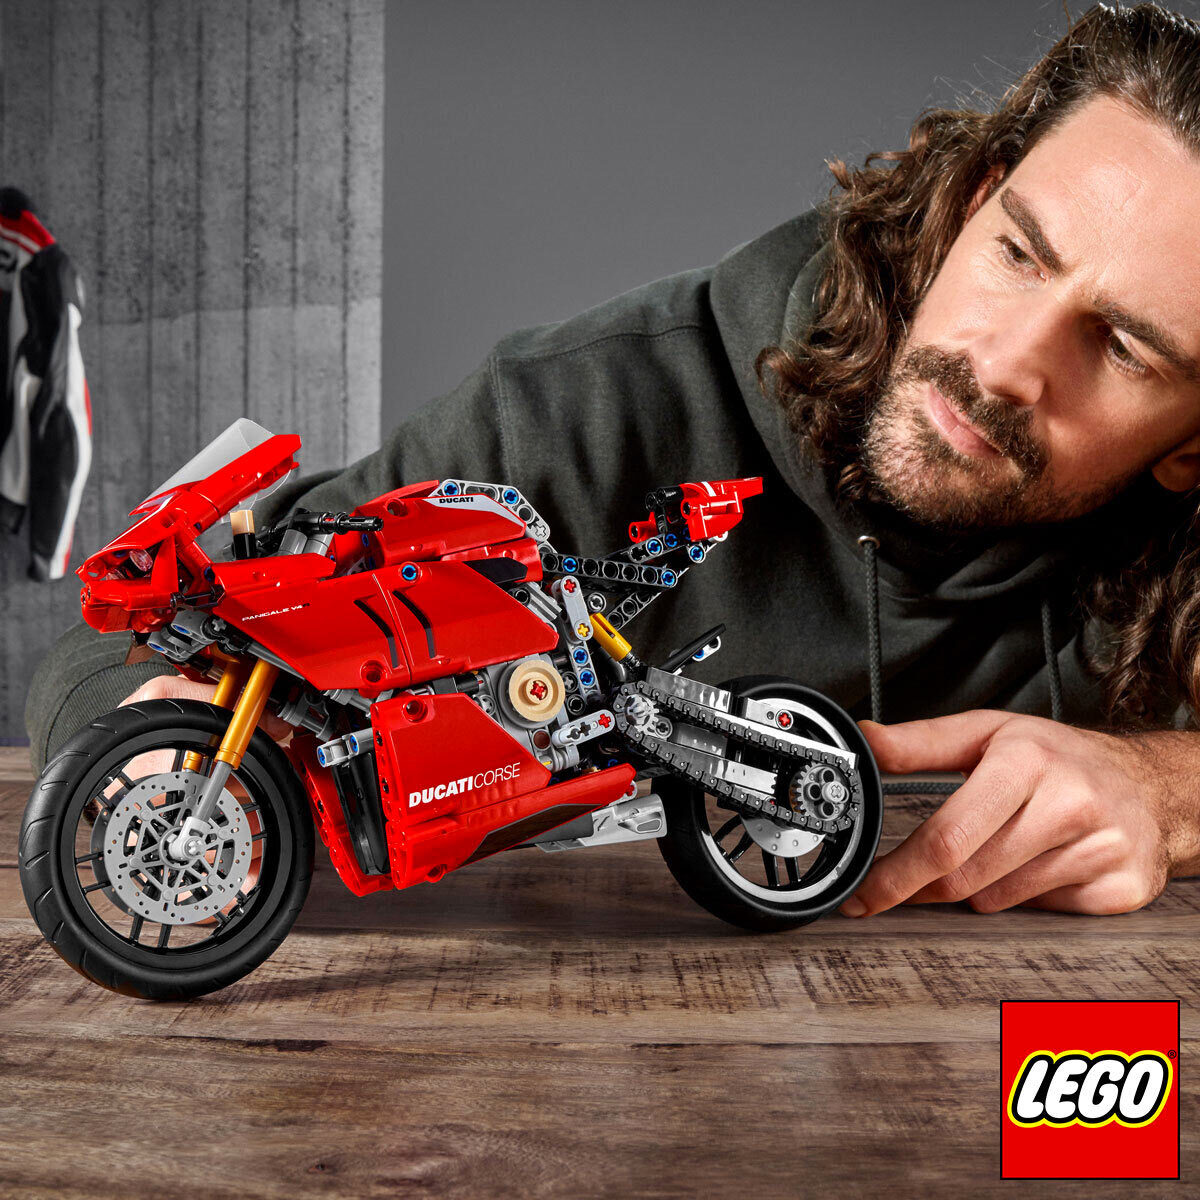 LEGO Technic Ducati Panigale V4 R Motorcycle - Model 42107 (10+ Years)